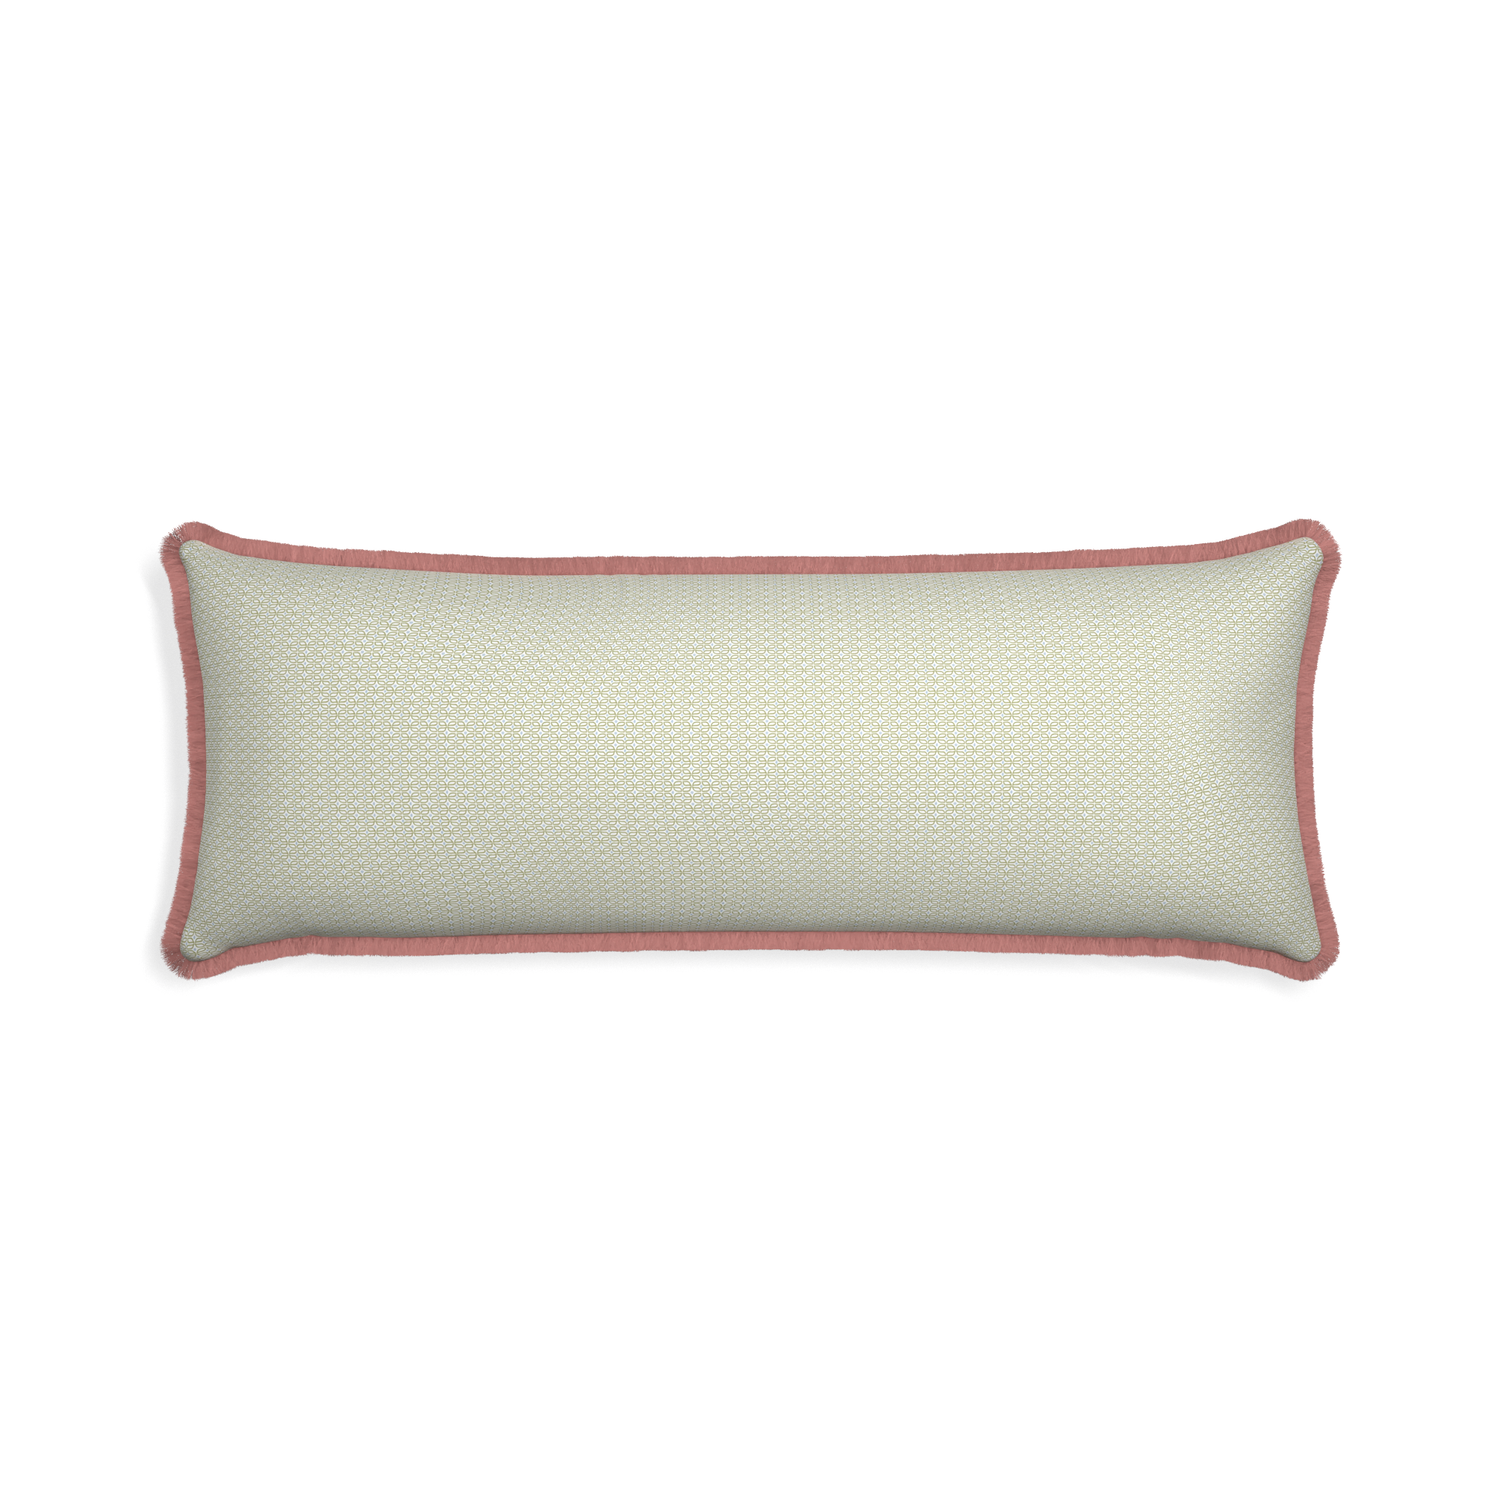 Xl-lumbar loomi moss custom moss green geometricpillow with d fringe on white background